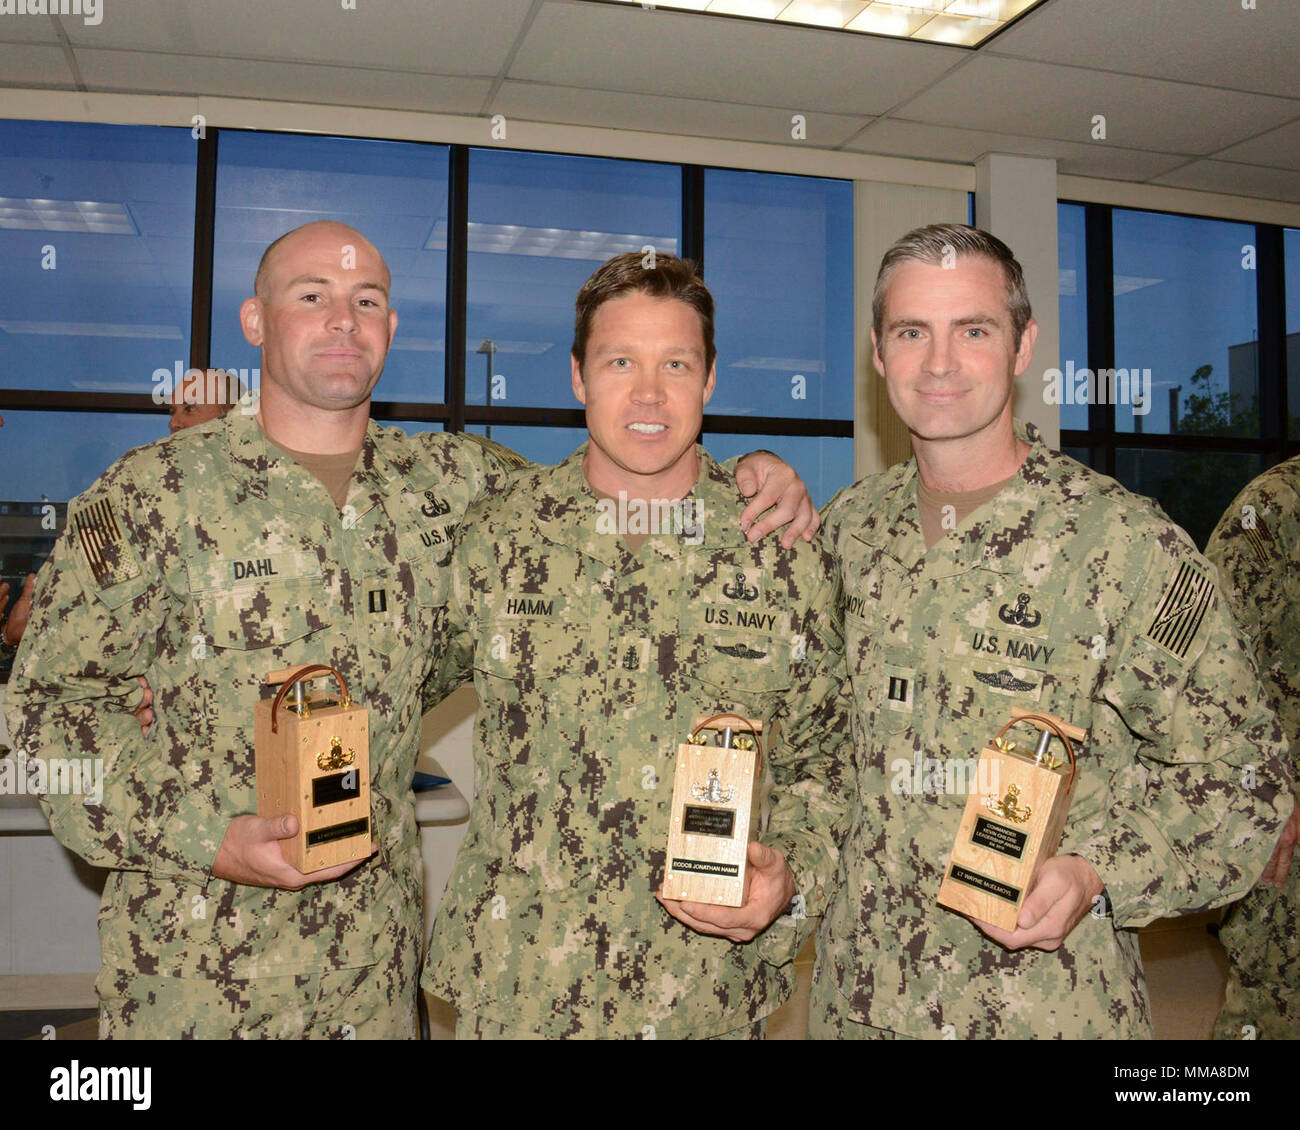 SAN DIEGO (Sept. 20, 2017) Rear Adm. Brian Brakke, commander of Navy Expeditionary Combat Command (NECC)  presented Lt. Morgan Dahl (left) the Rear Adm. Draper L. Kauffman leadership award, Explosive Ordnance Disposal Senior Chief Jonathan Hamm (middle) with the Force Master Chief Anthony Santino Leadership, and Lt. Wayne Mcelmoyl (right) with the Cmdr. Kevin Childre Excellence award during an award ceremony at Explosive Ordnance Disposal (EOD) Mobile Unit Three aboard Naval Base Coronado, Sept. 20. U.S. Navy EOD is the world's premier combat force for countering explosive hazards and conducti Stock Photo